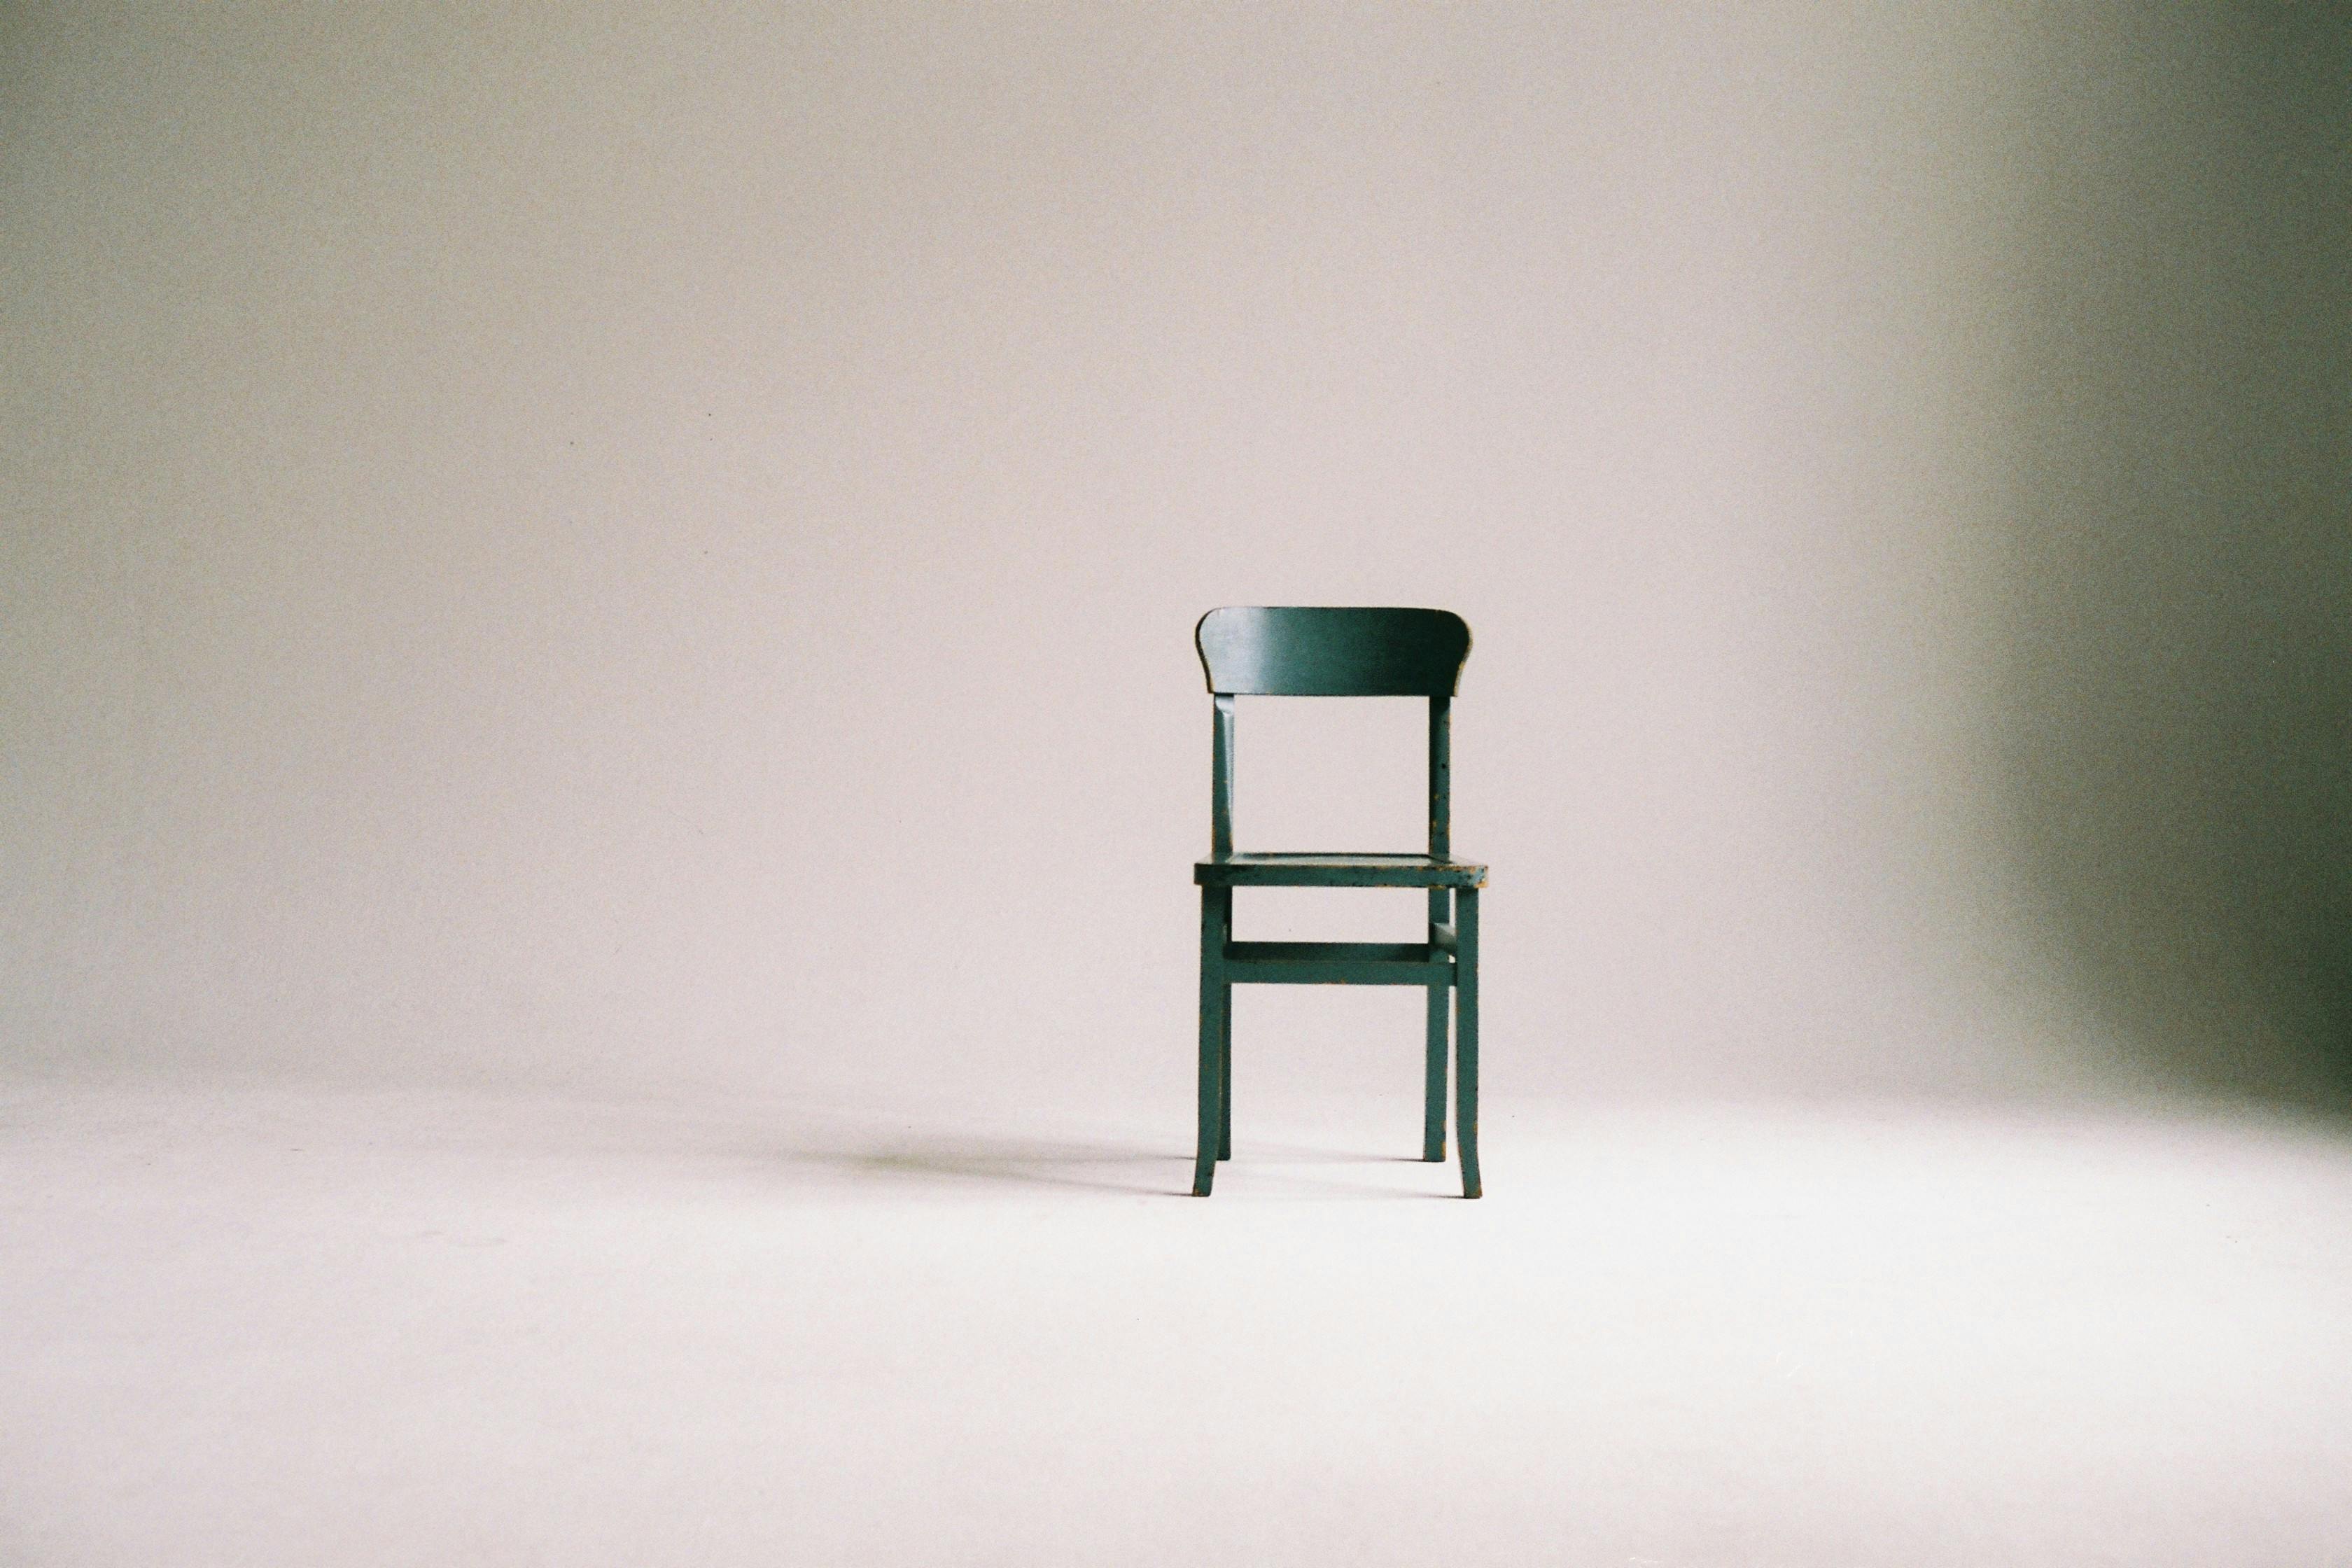 The empty chair | Source: Pexels